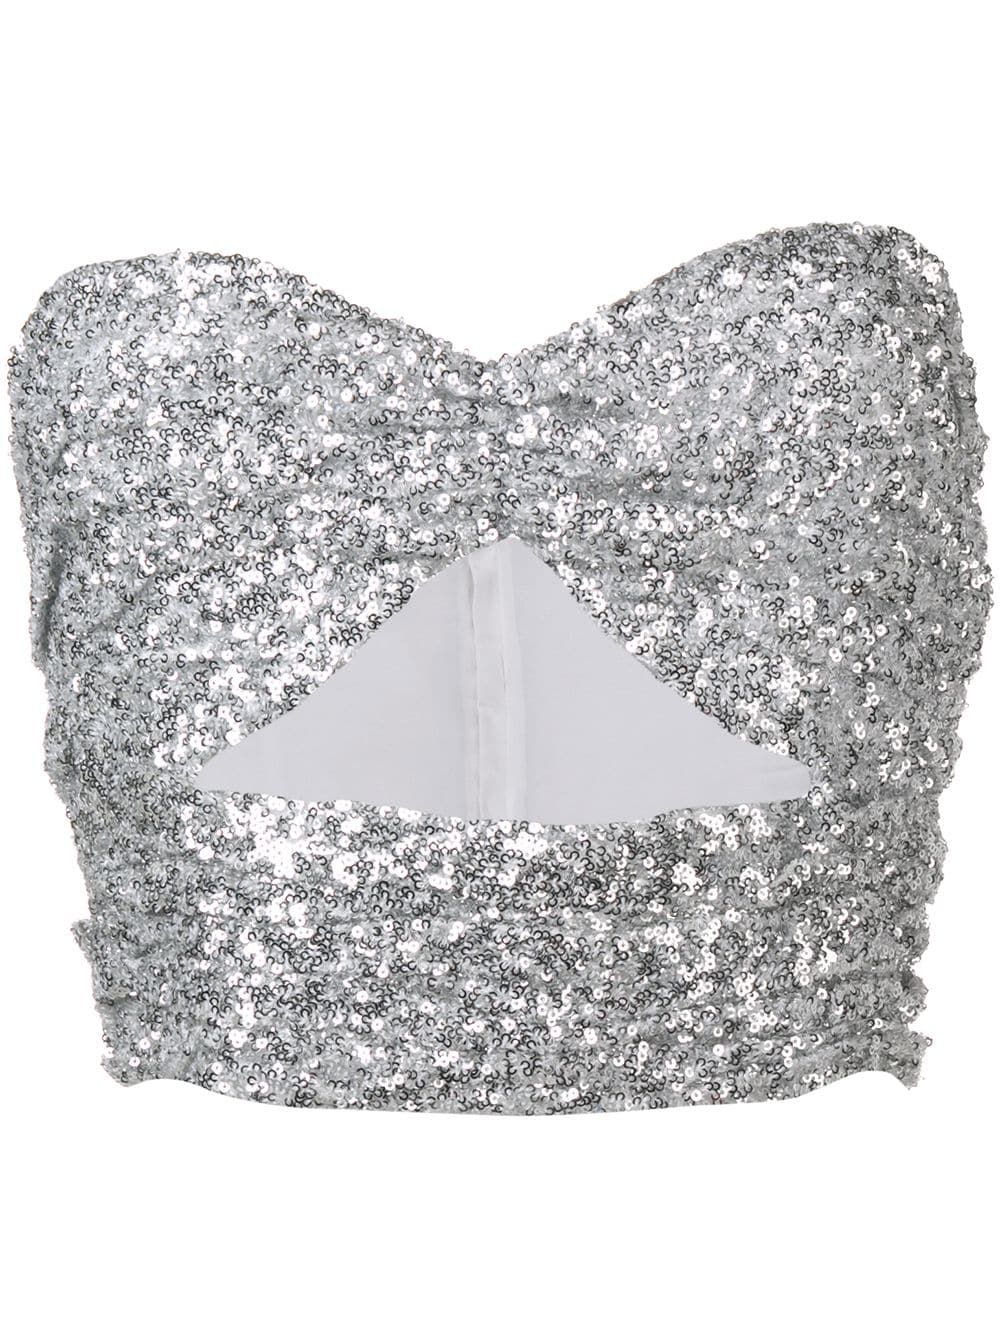 How to Style Silver Sequin Top: Best 13 Eye Catching Outfits for Ladies